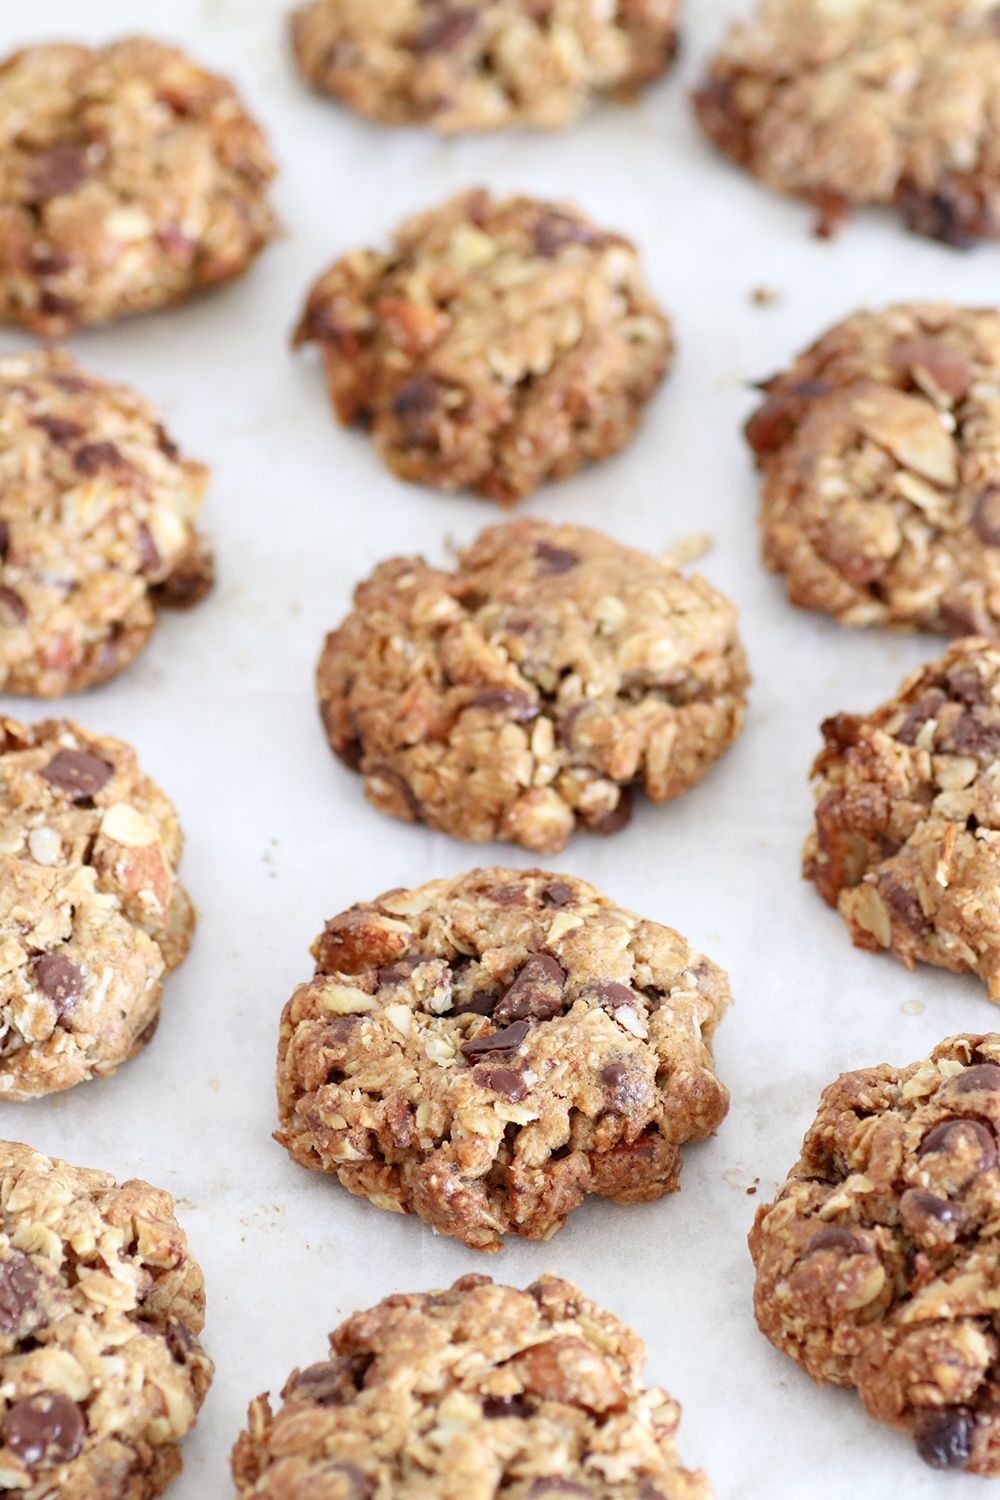 Chocolate Chip Granola Cookies with Almonds